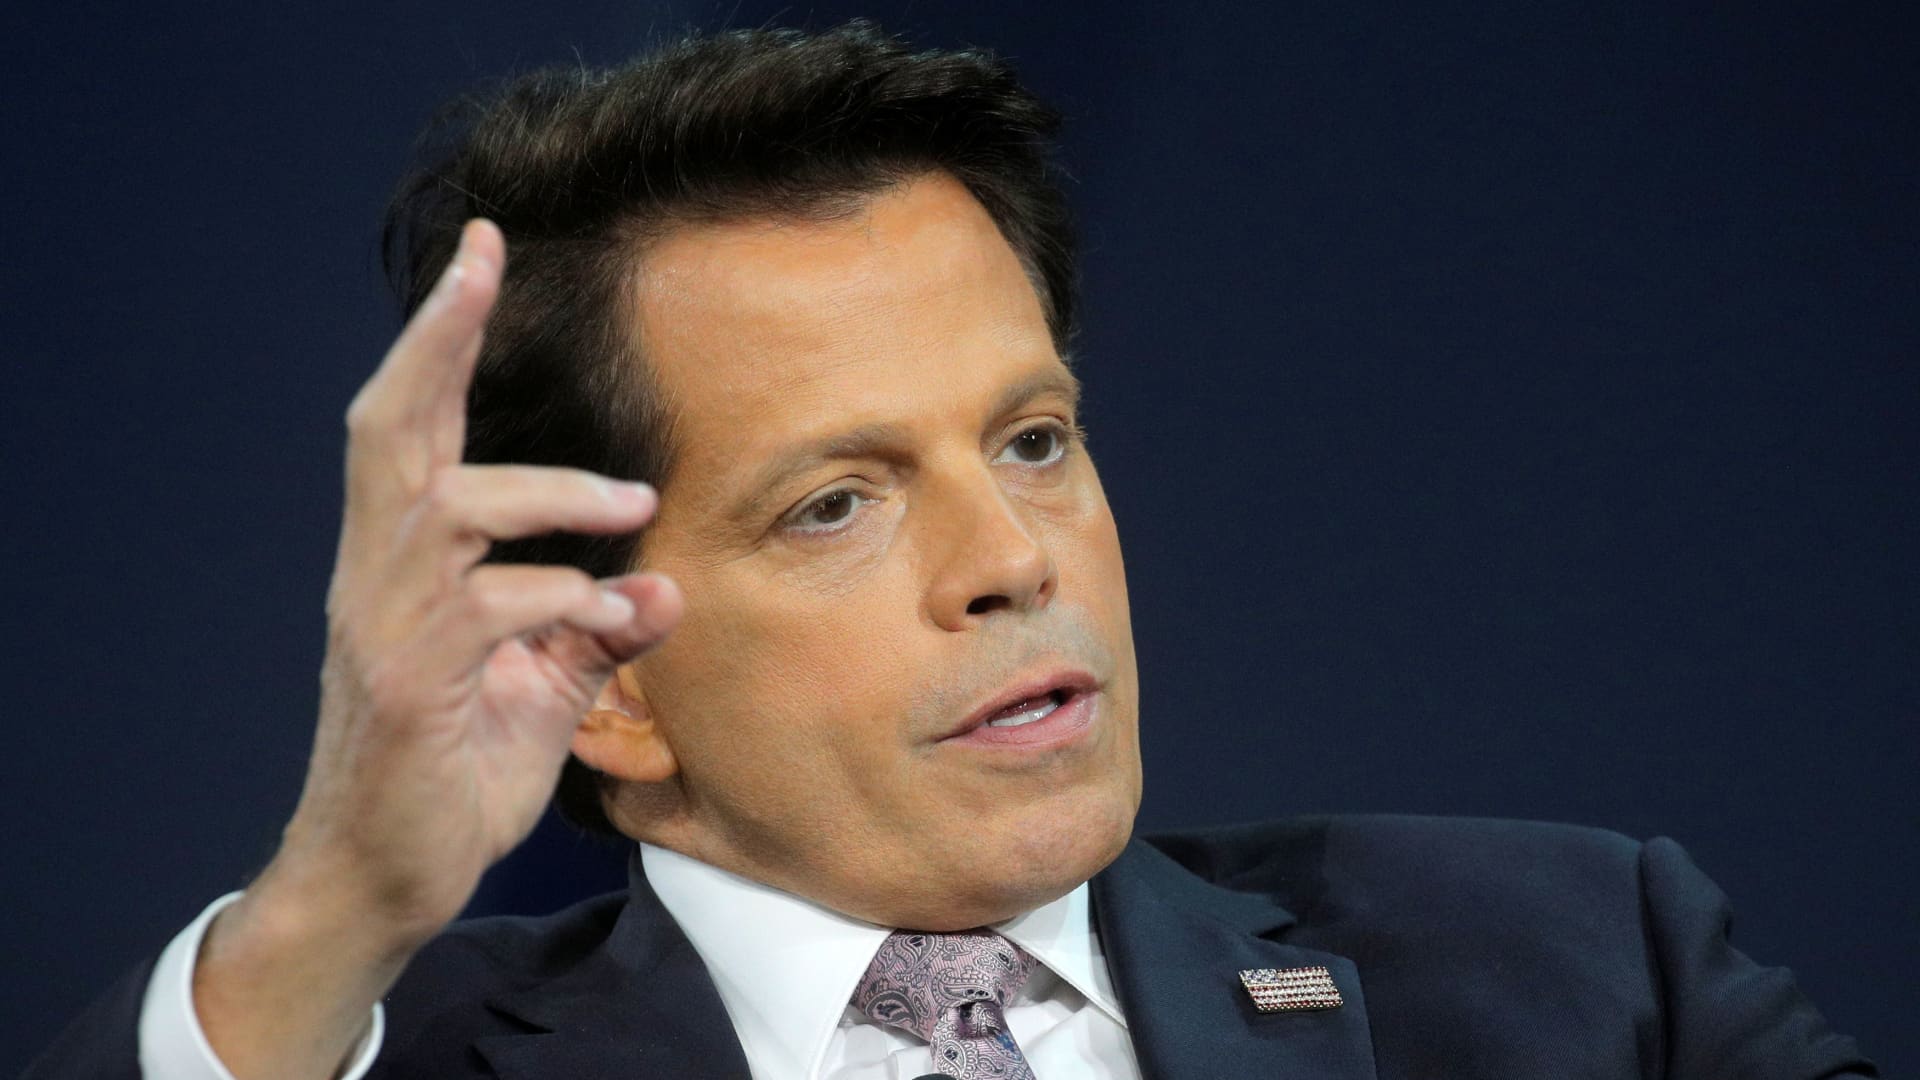 Scaramucci says SkyBridge can buy back FTX stake this year, alleges SBF ‘committed fraud’